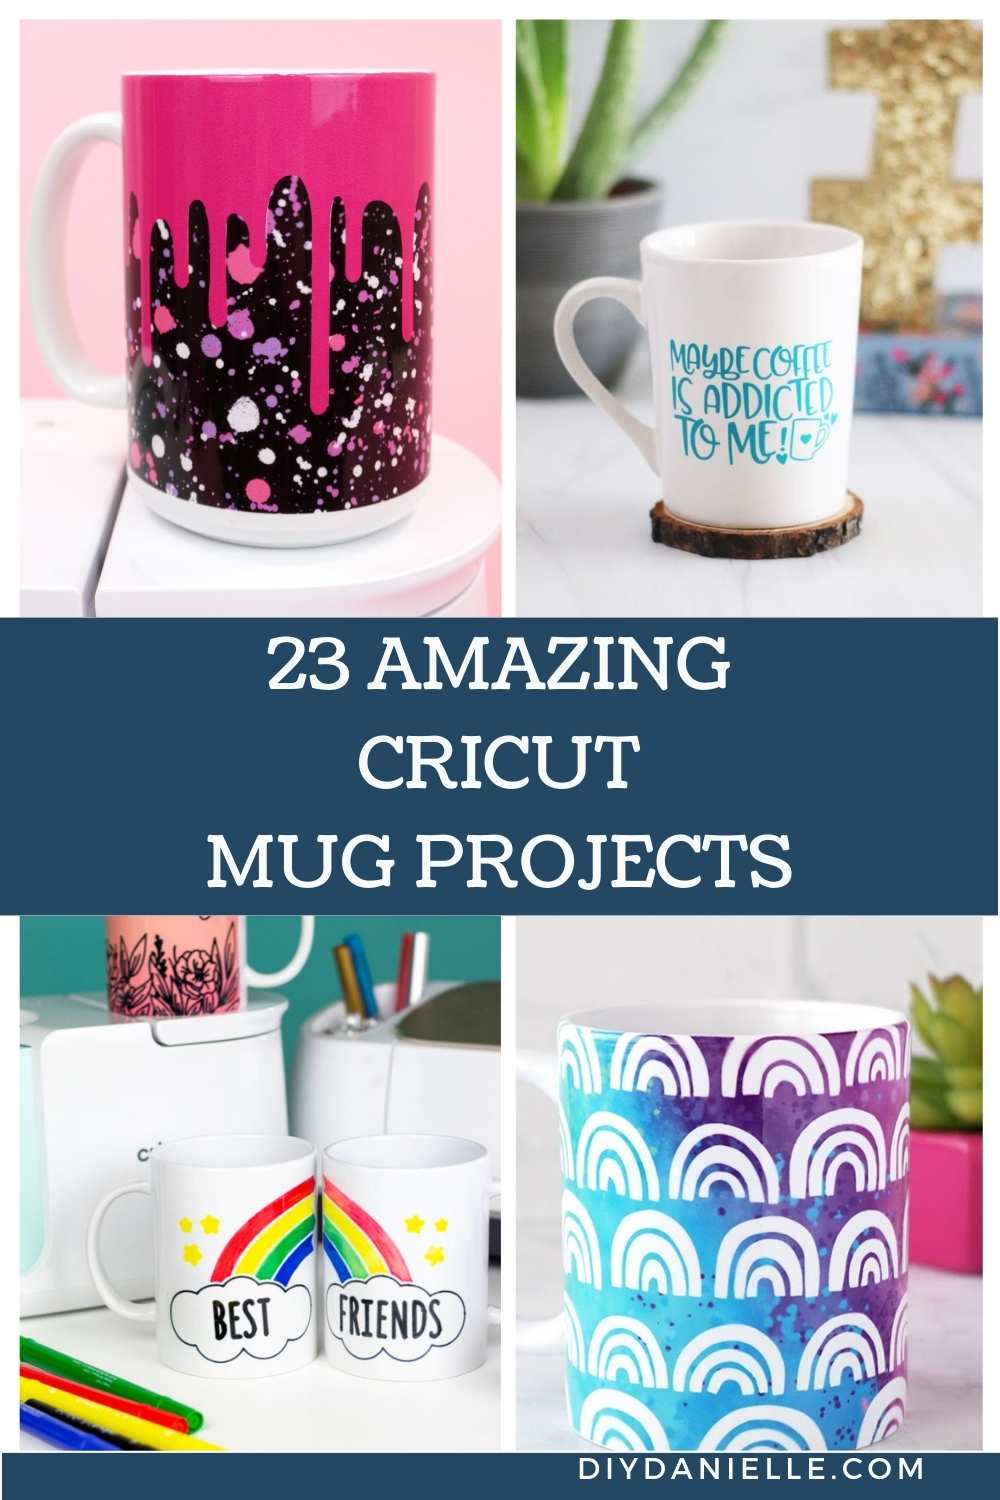 Cricut mug projects pin collage with text overlay